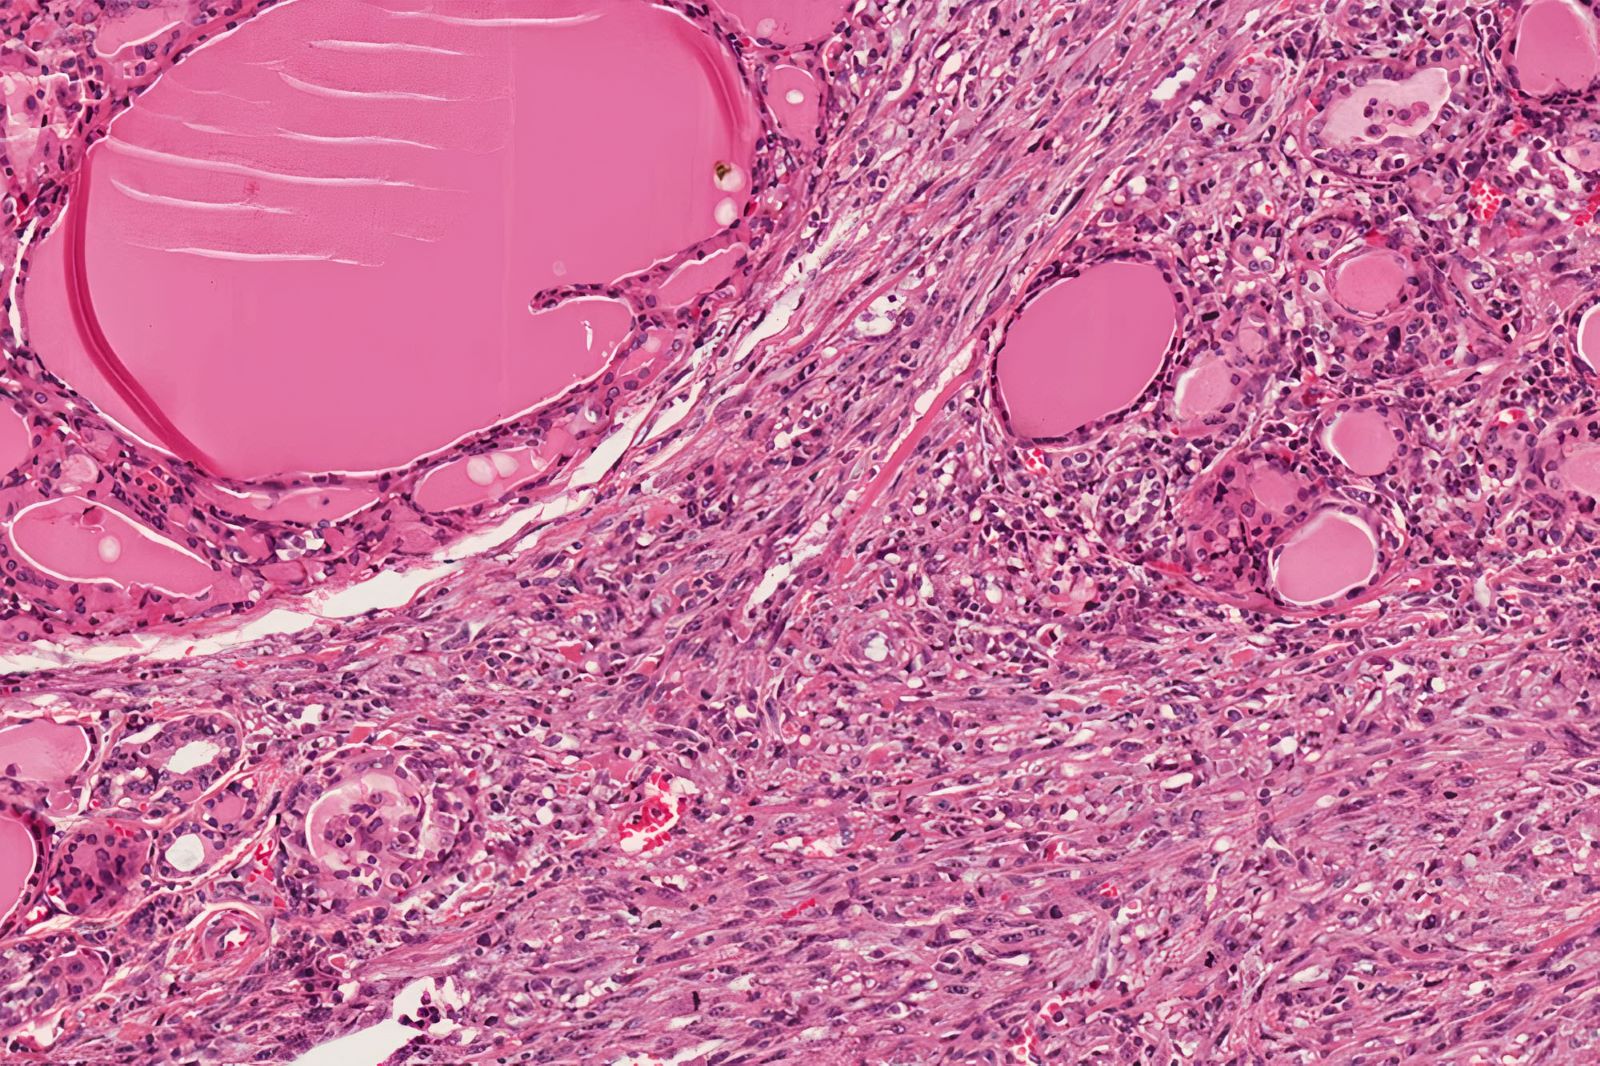 Entrapped thyroid follicles